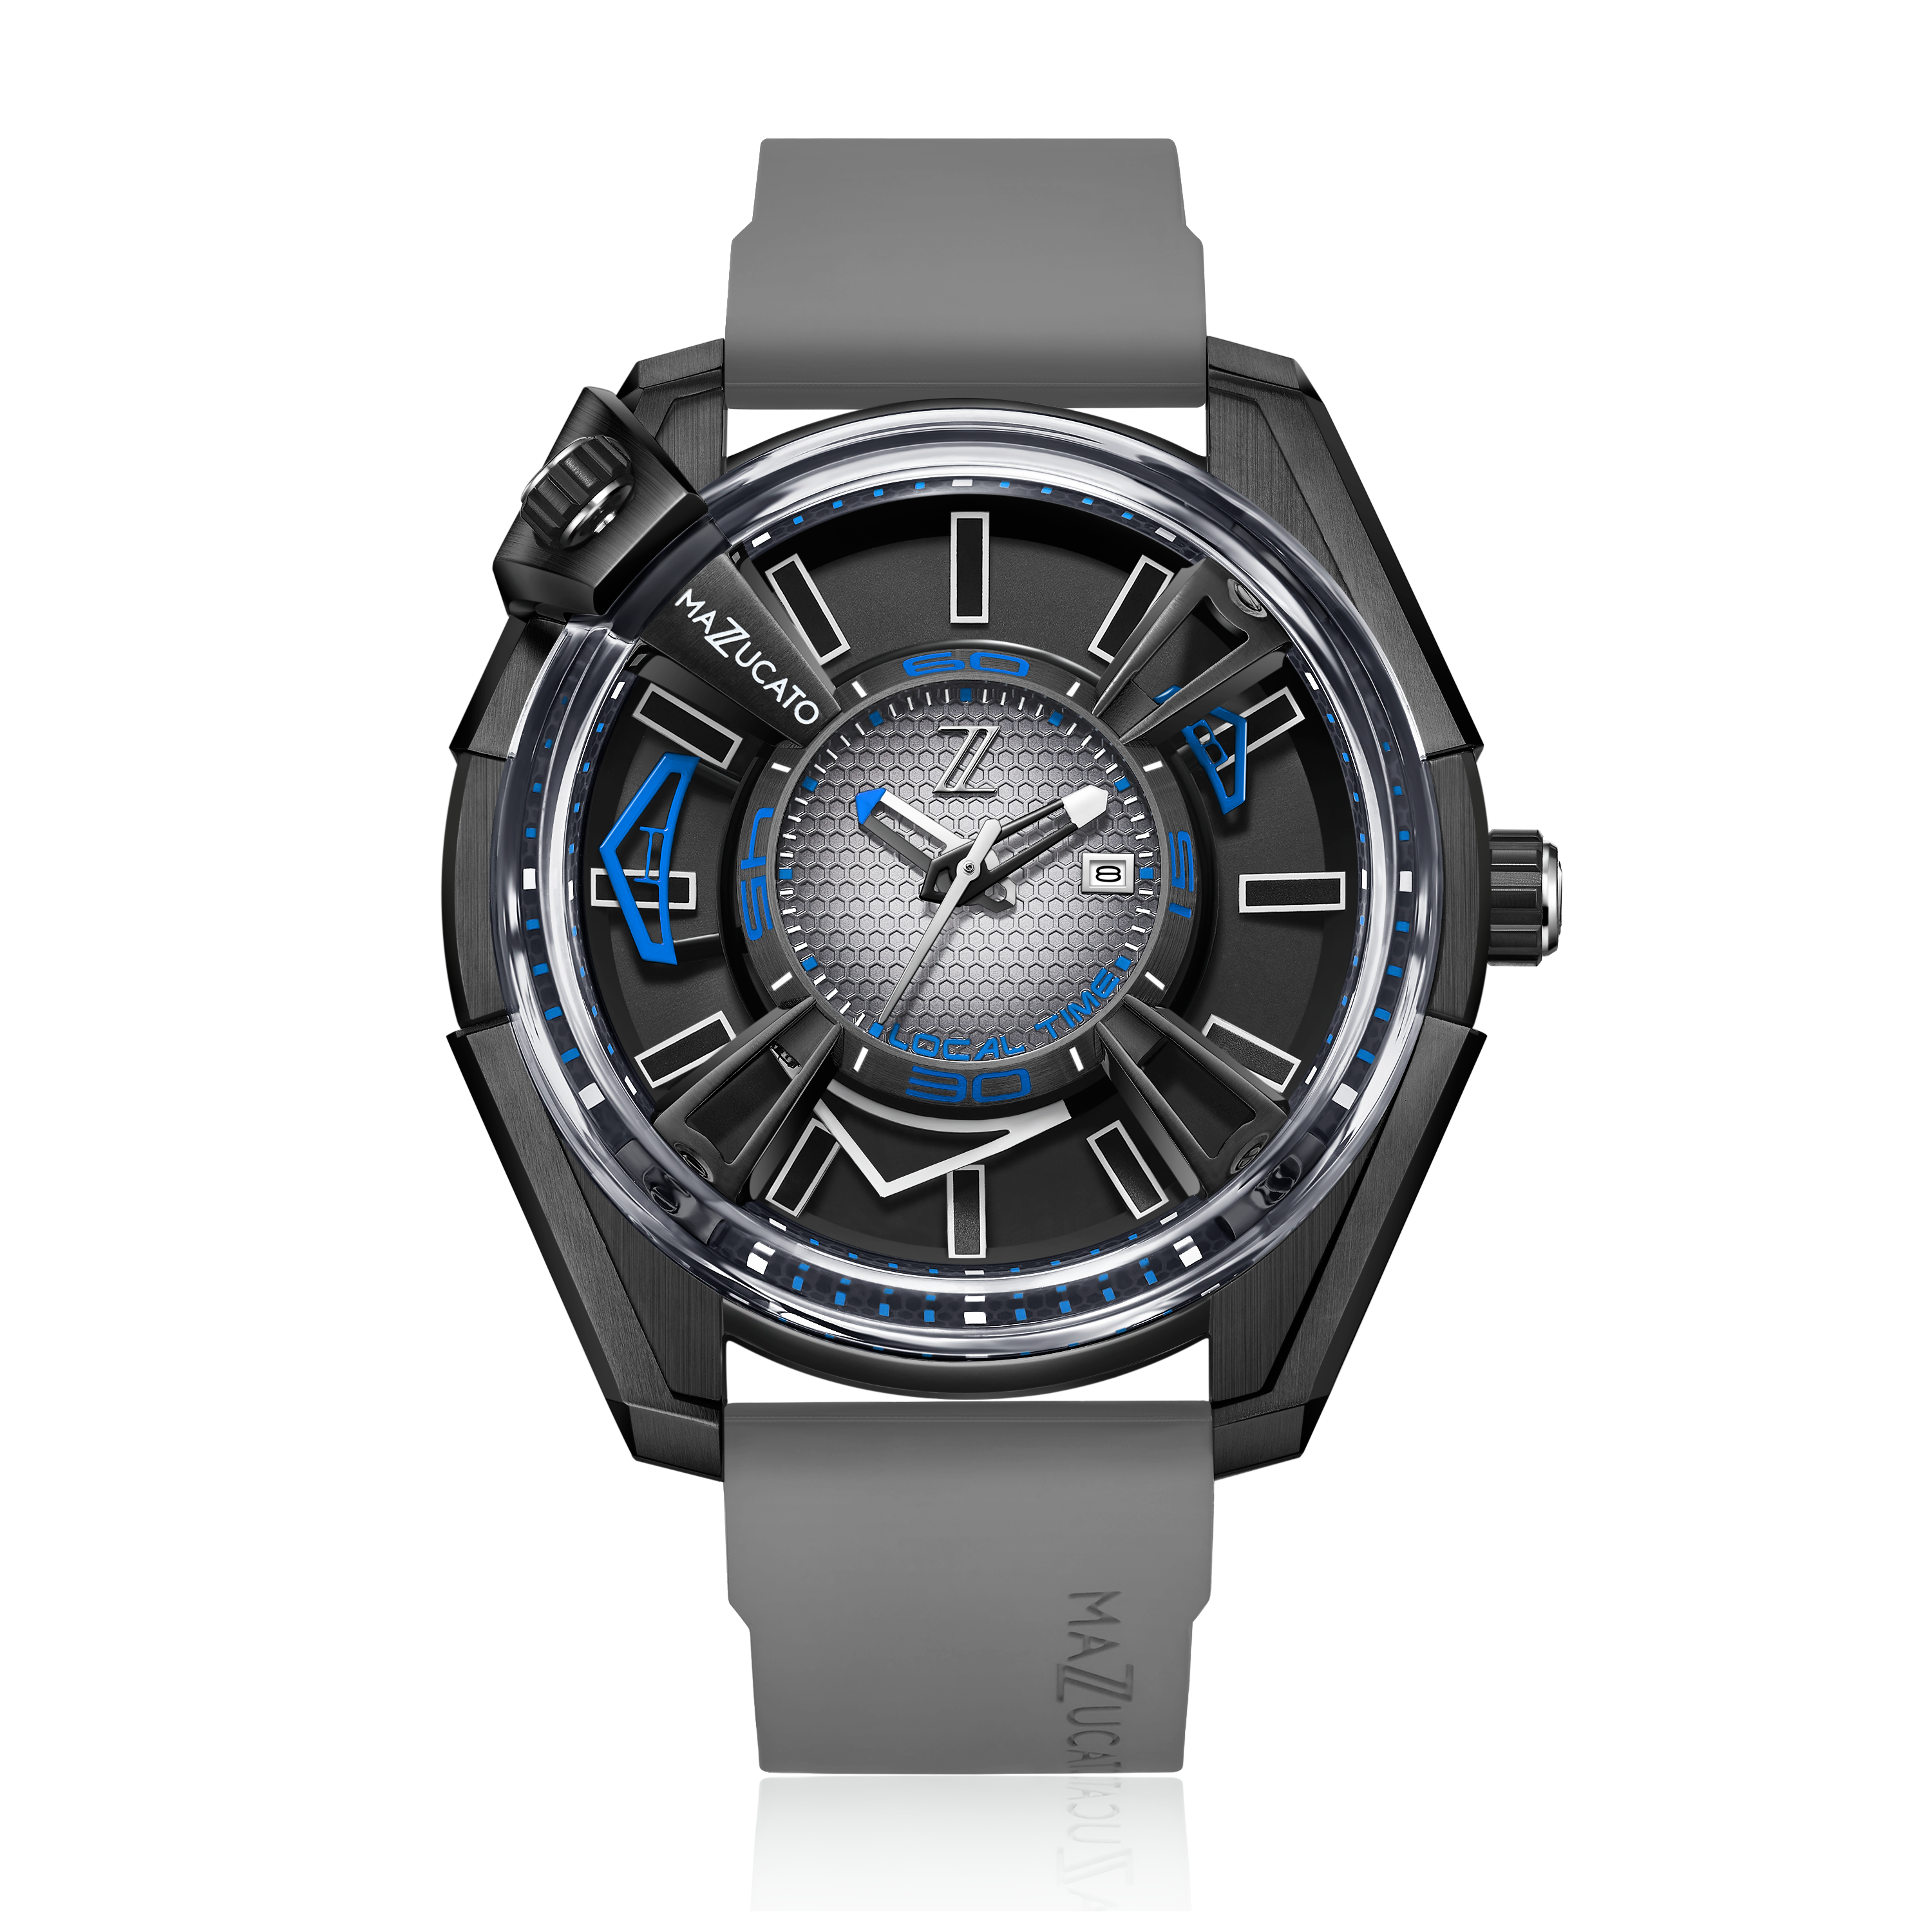 LAX Limited Edition - 03-GY - Dual Time Watch